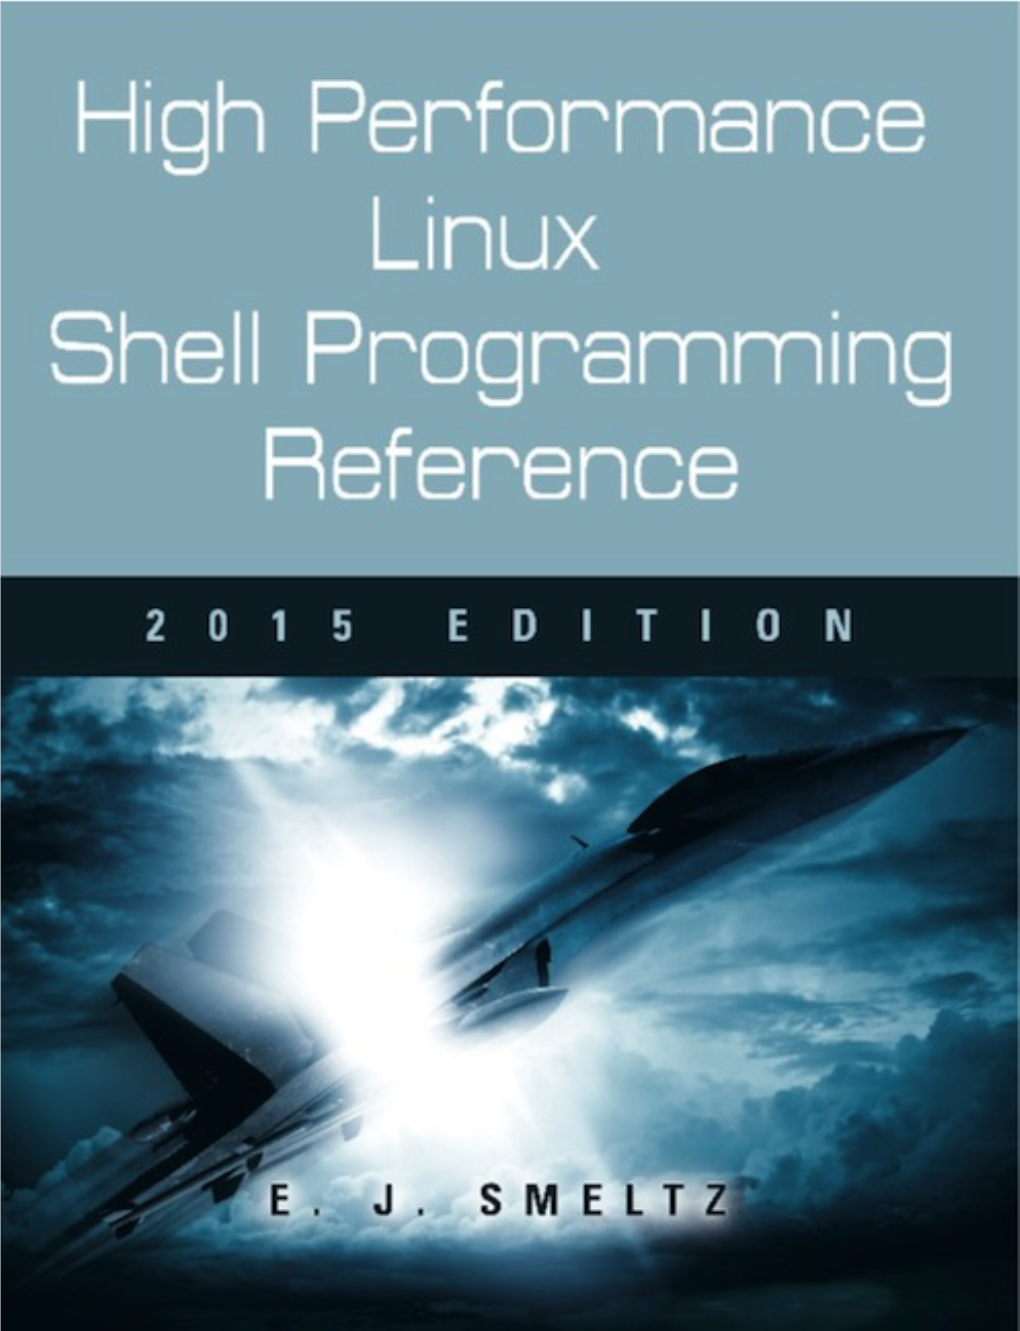 High Performance Linux Shell Programming Reference 2015 Edition